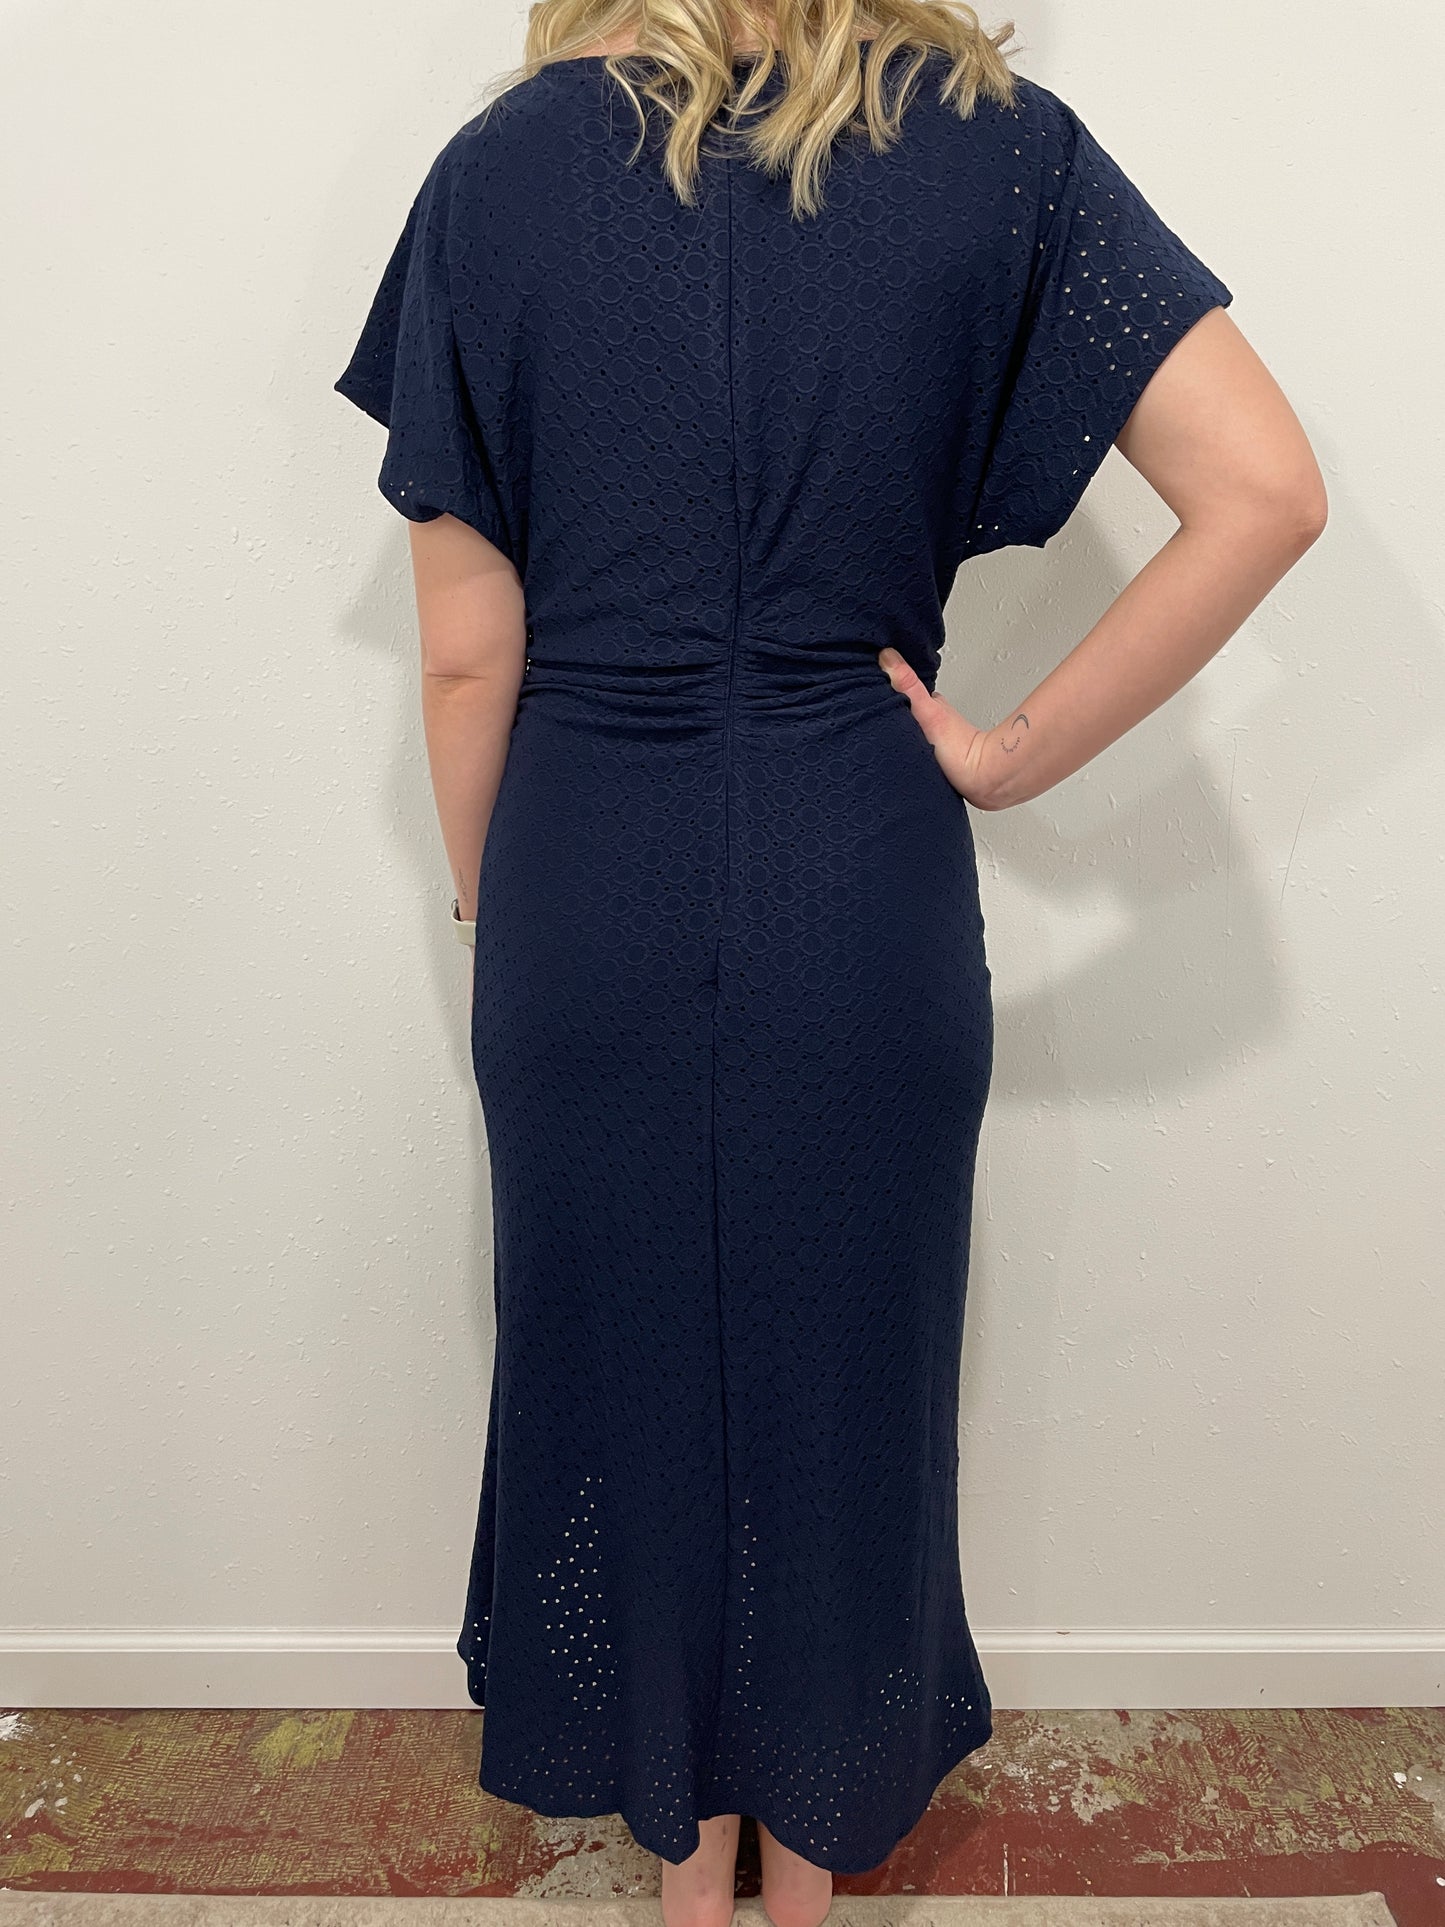 A THOUSAND WISHES EYELET DRESS - NAVY